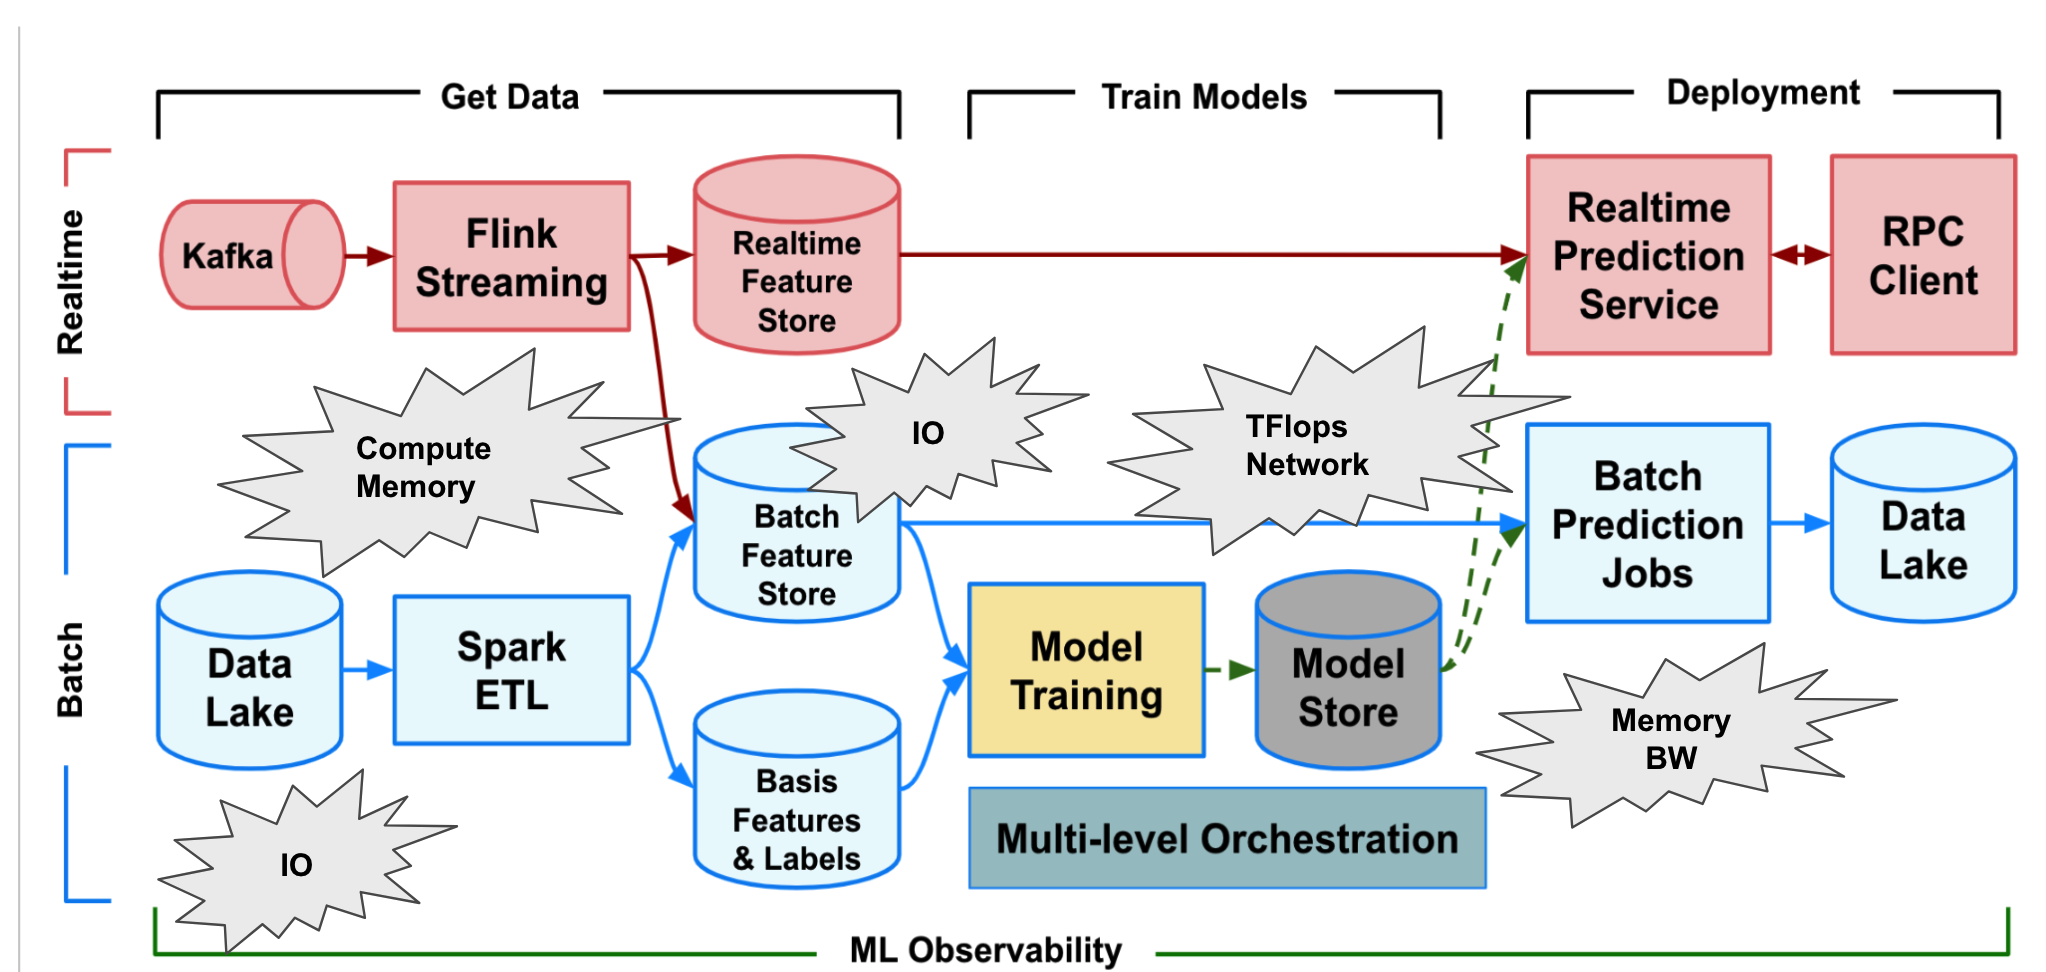 Machine Learning (ML) is celebrating its 8th year at Uber since we first started using complex rule-based machine learning models for driver-rider mat